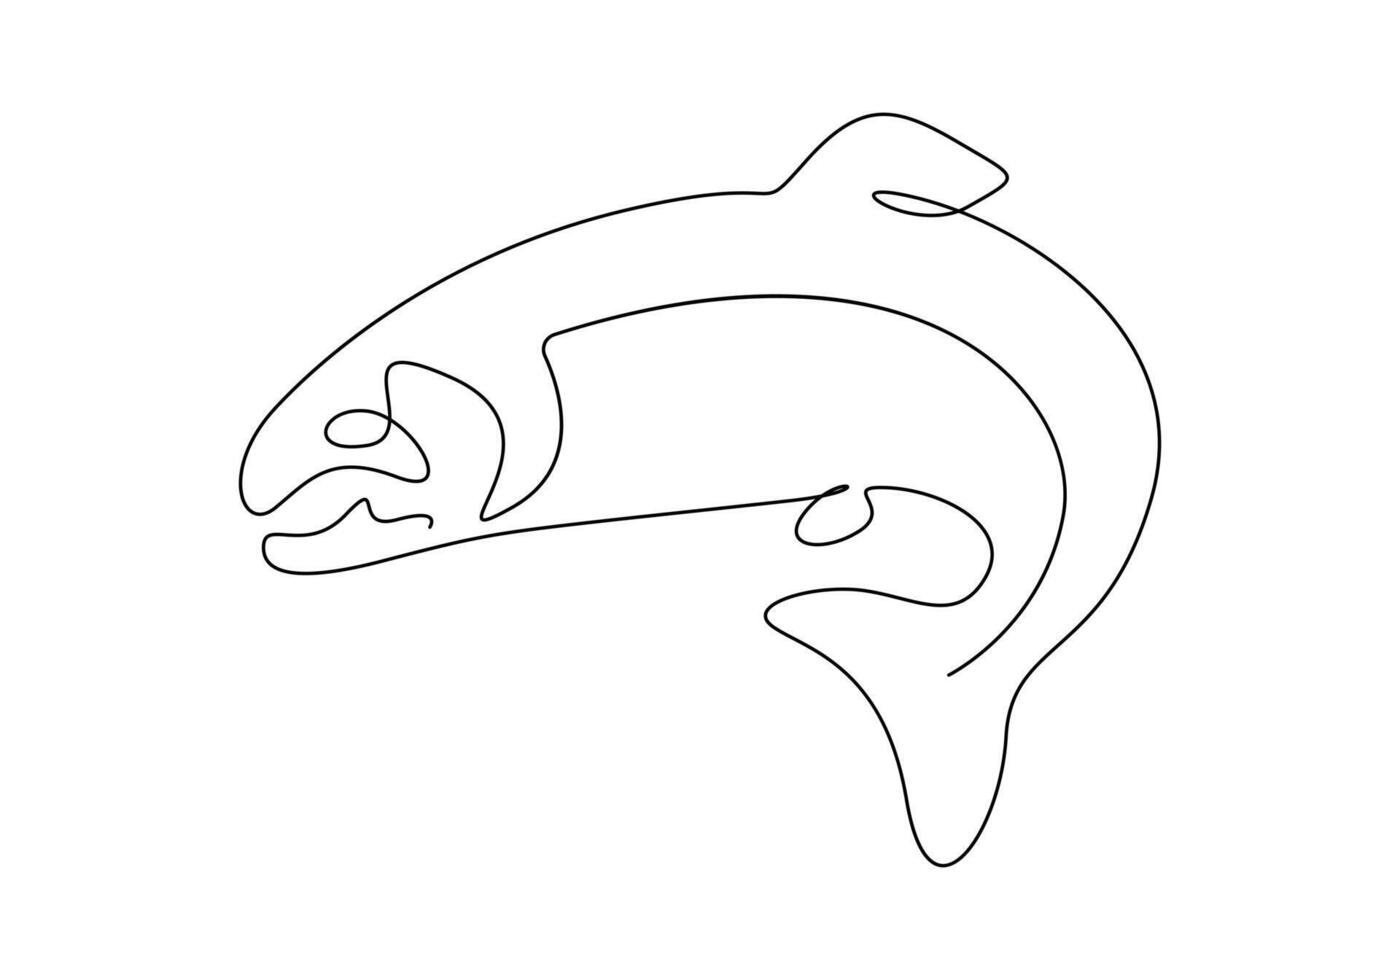 Continuous one line drawing of salmon for fishing logo identity premium illustration vector